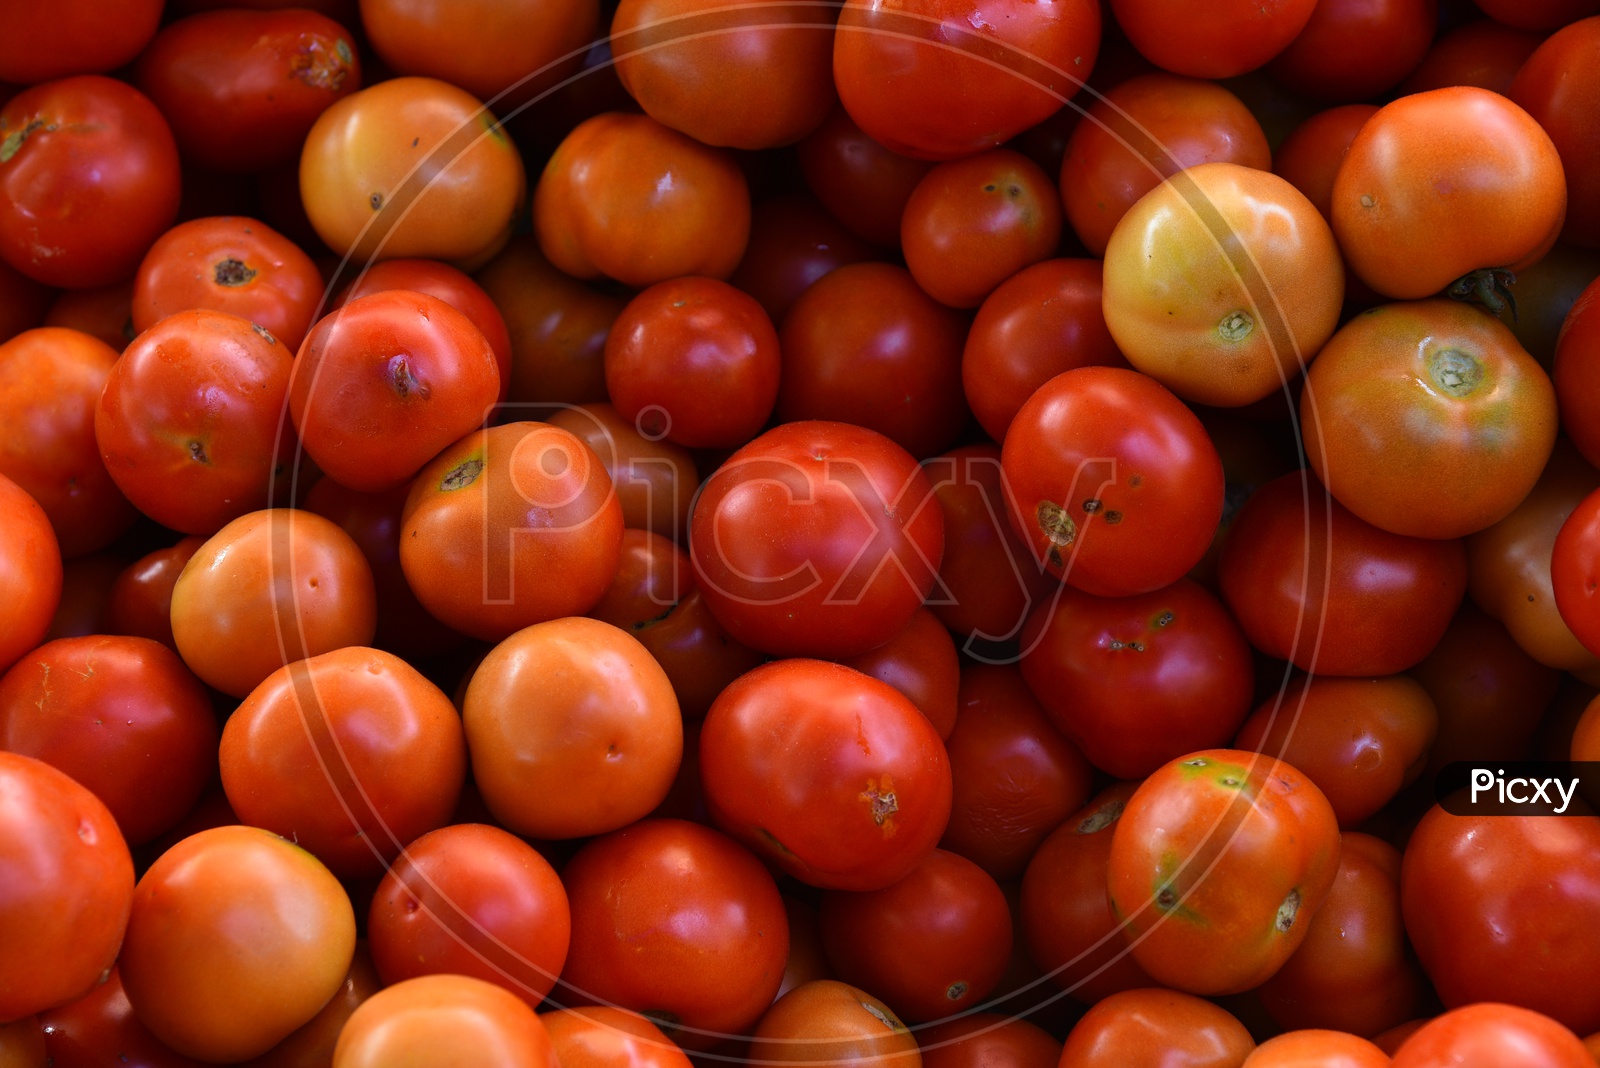 Vegetables - Tomato/Tomatoes at Local Market/Rythu Bazar